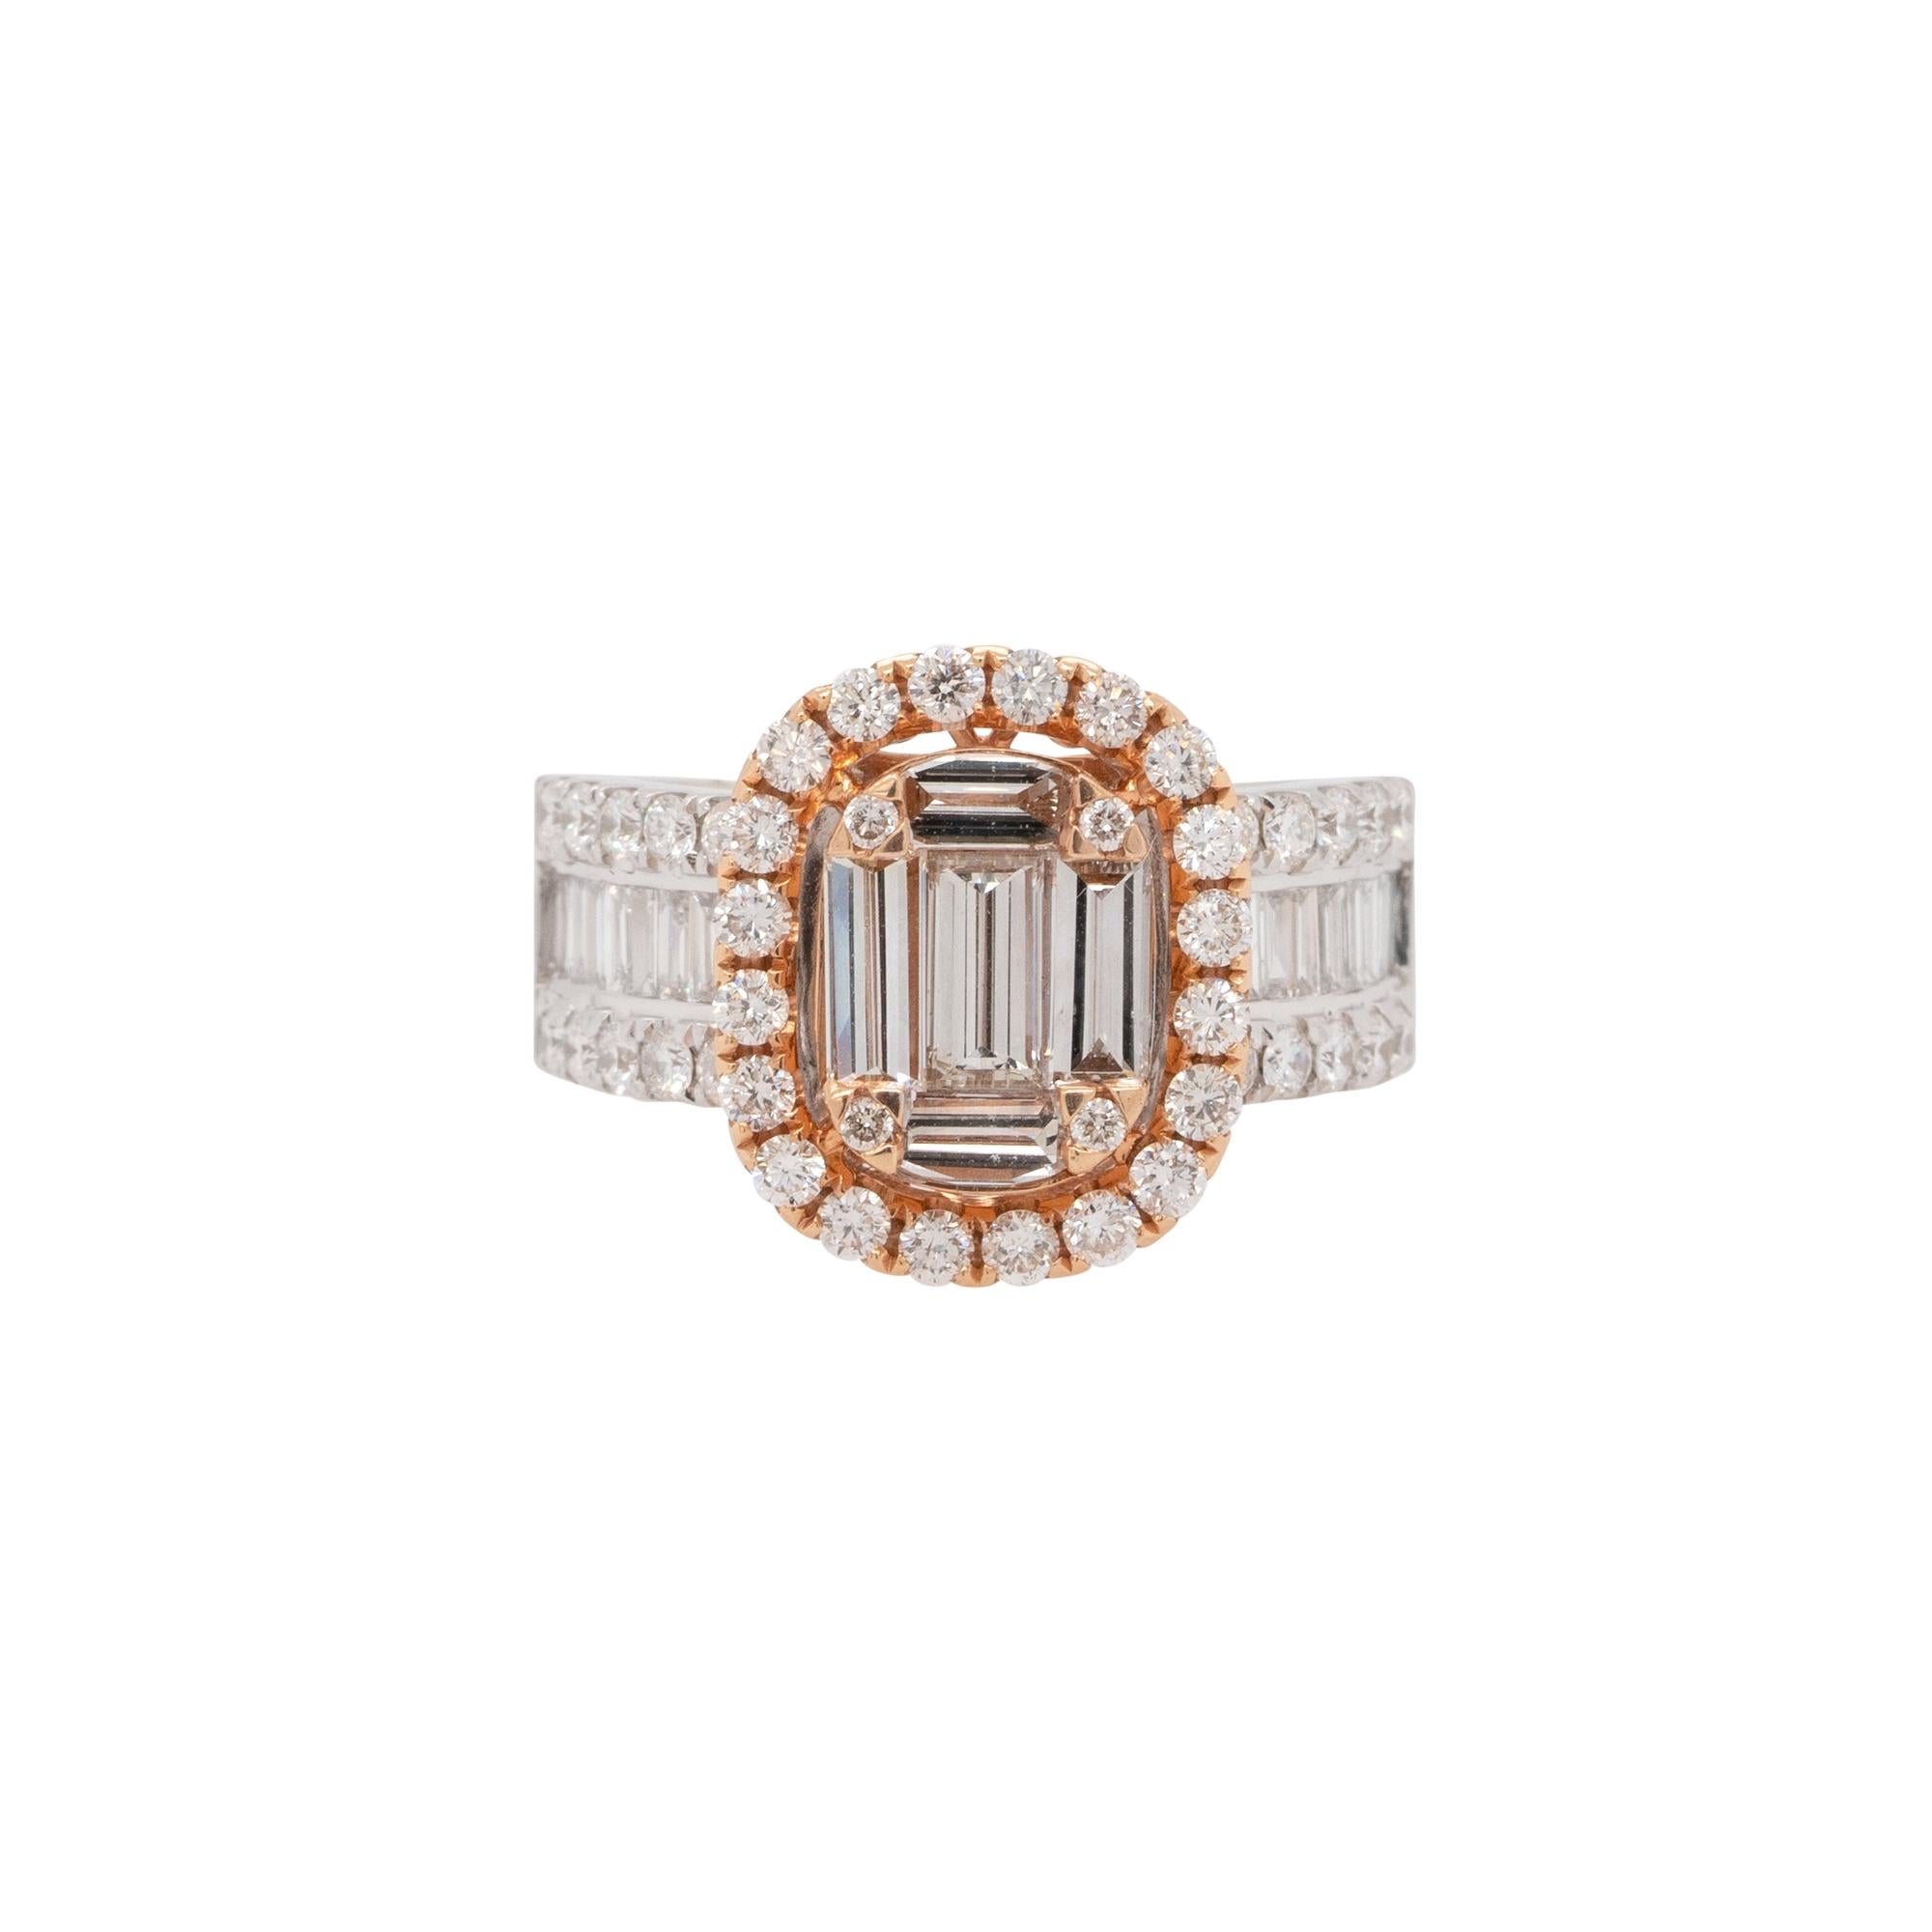 18K Rose/White Gold 2.64ctw Halo Engagement Ring

Material	18k white/ rose gold
Diamond Details	Approximately 2.64ctw round/baguettediamond. Diamonds are G/H in color and VS in clarity.
Item Weight	12.1g (7.8dwt)
Ring Measurements	sz 7 22mm x 15mm x